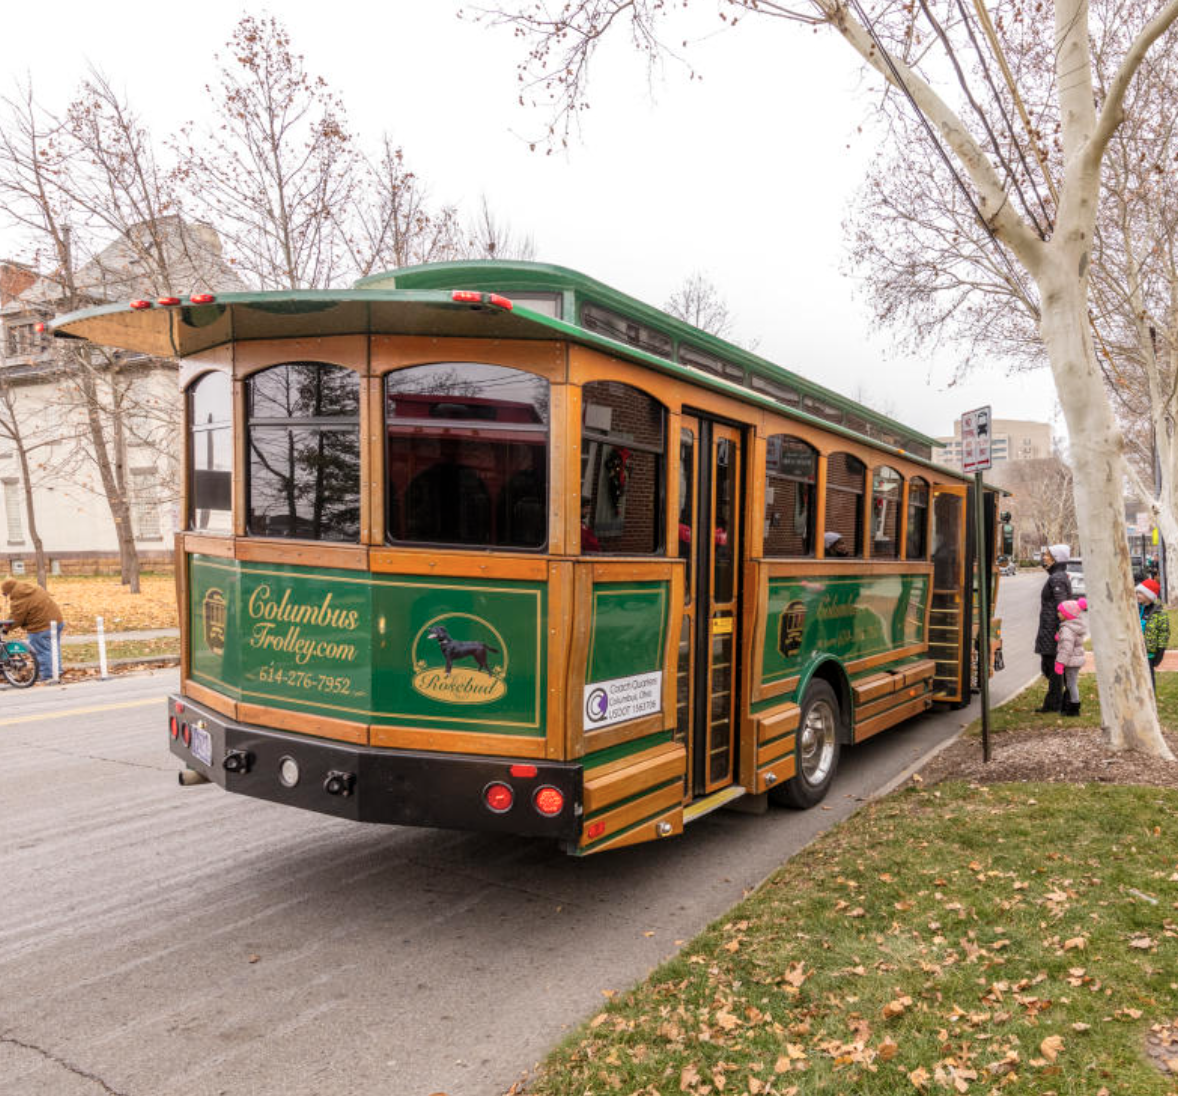 Get Festive at the 10th Annual Downtown Holiday Trolley Hop in Columbus